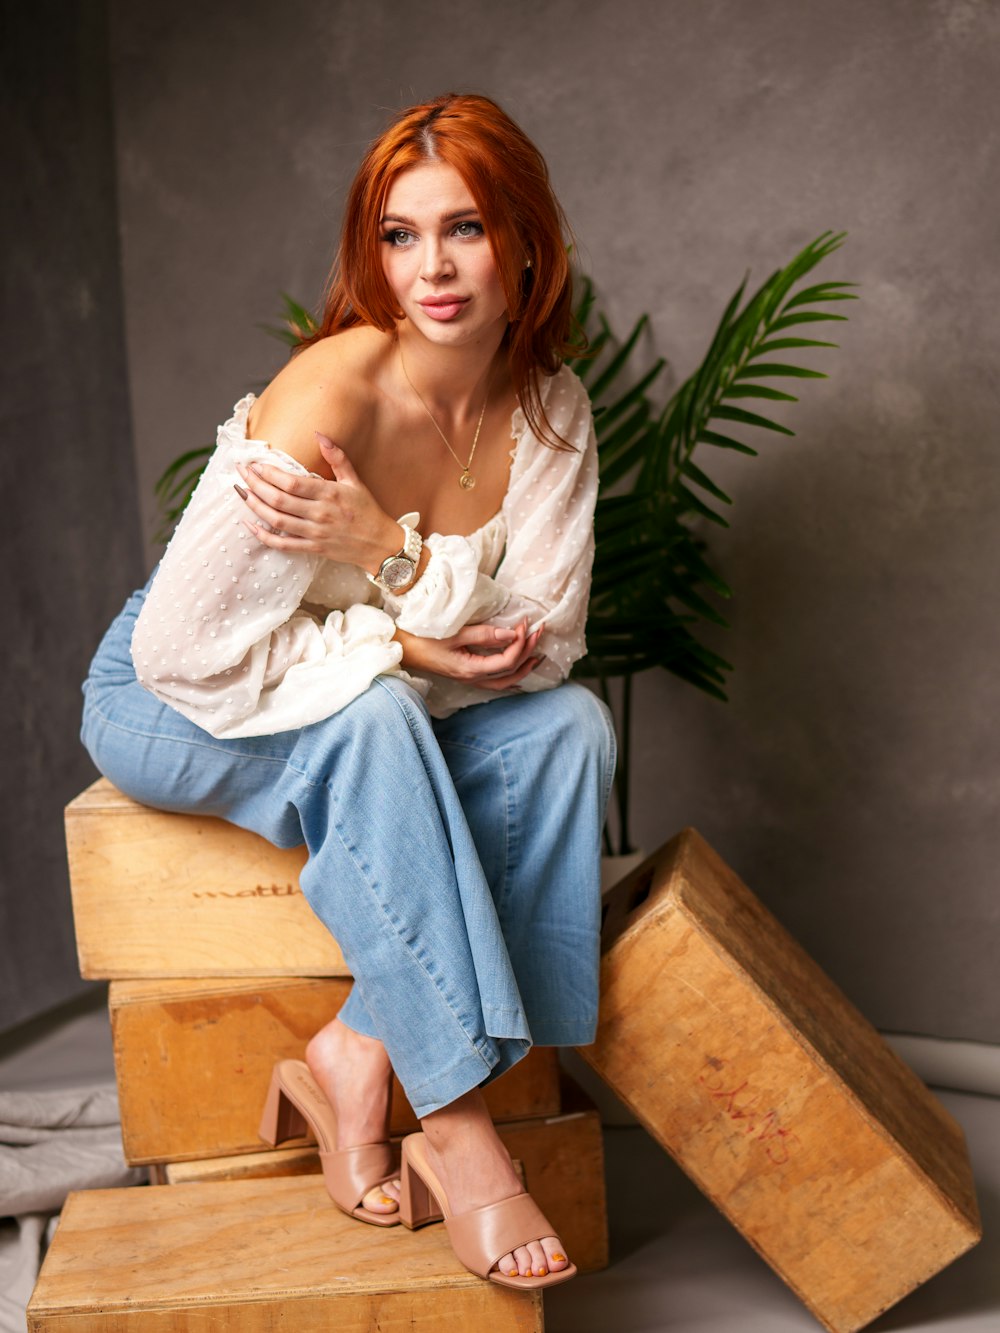 a woman with red hair sitting on a wooden box